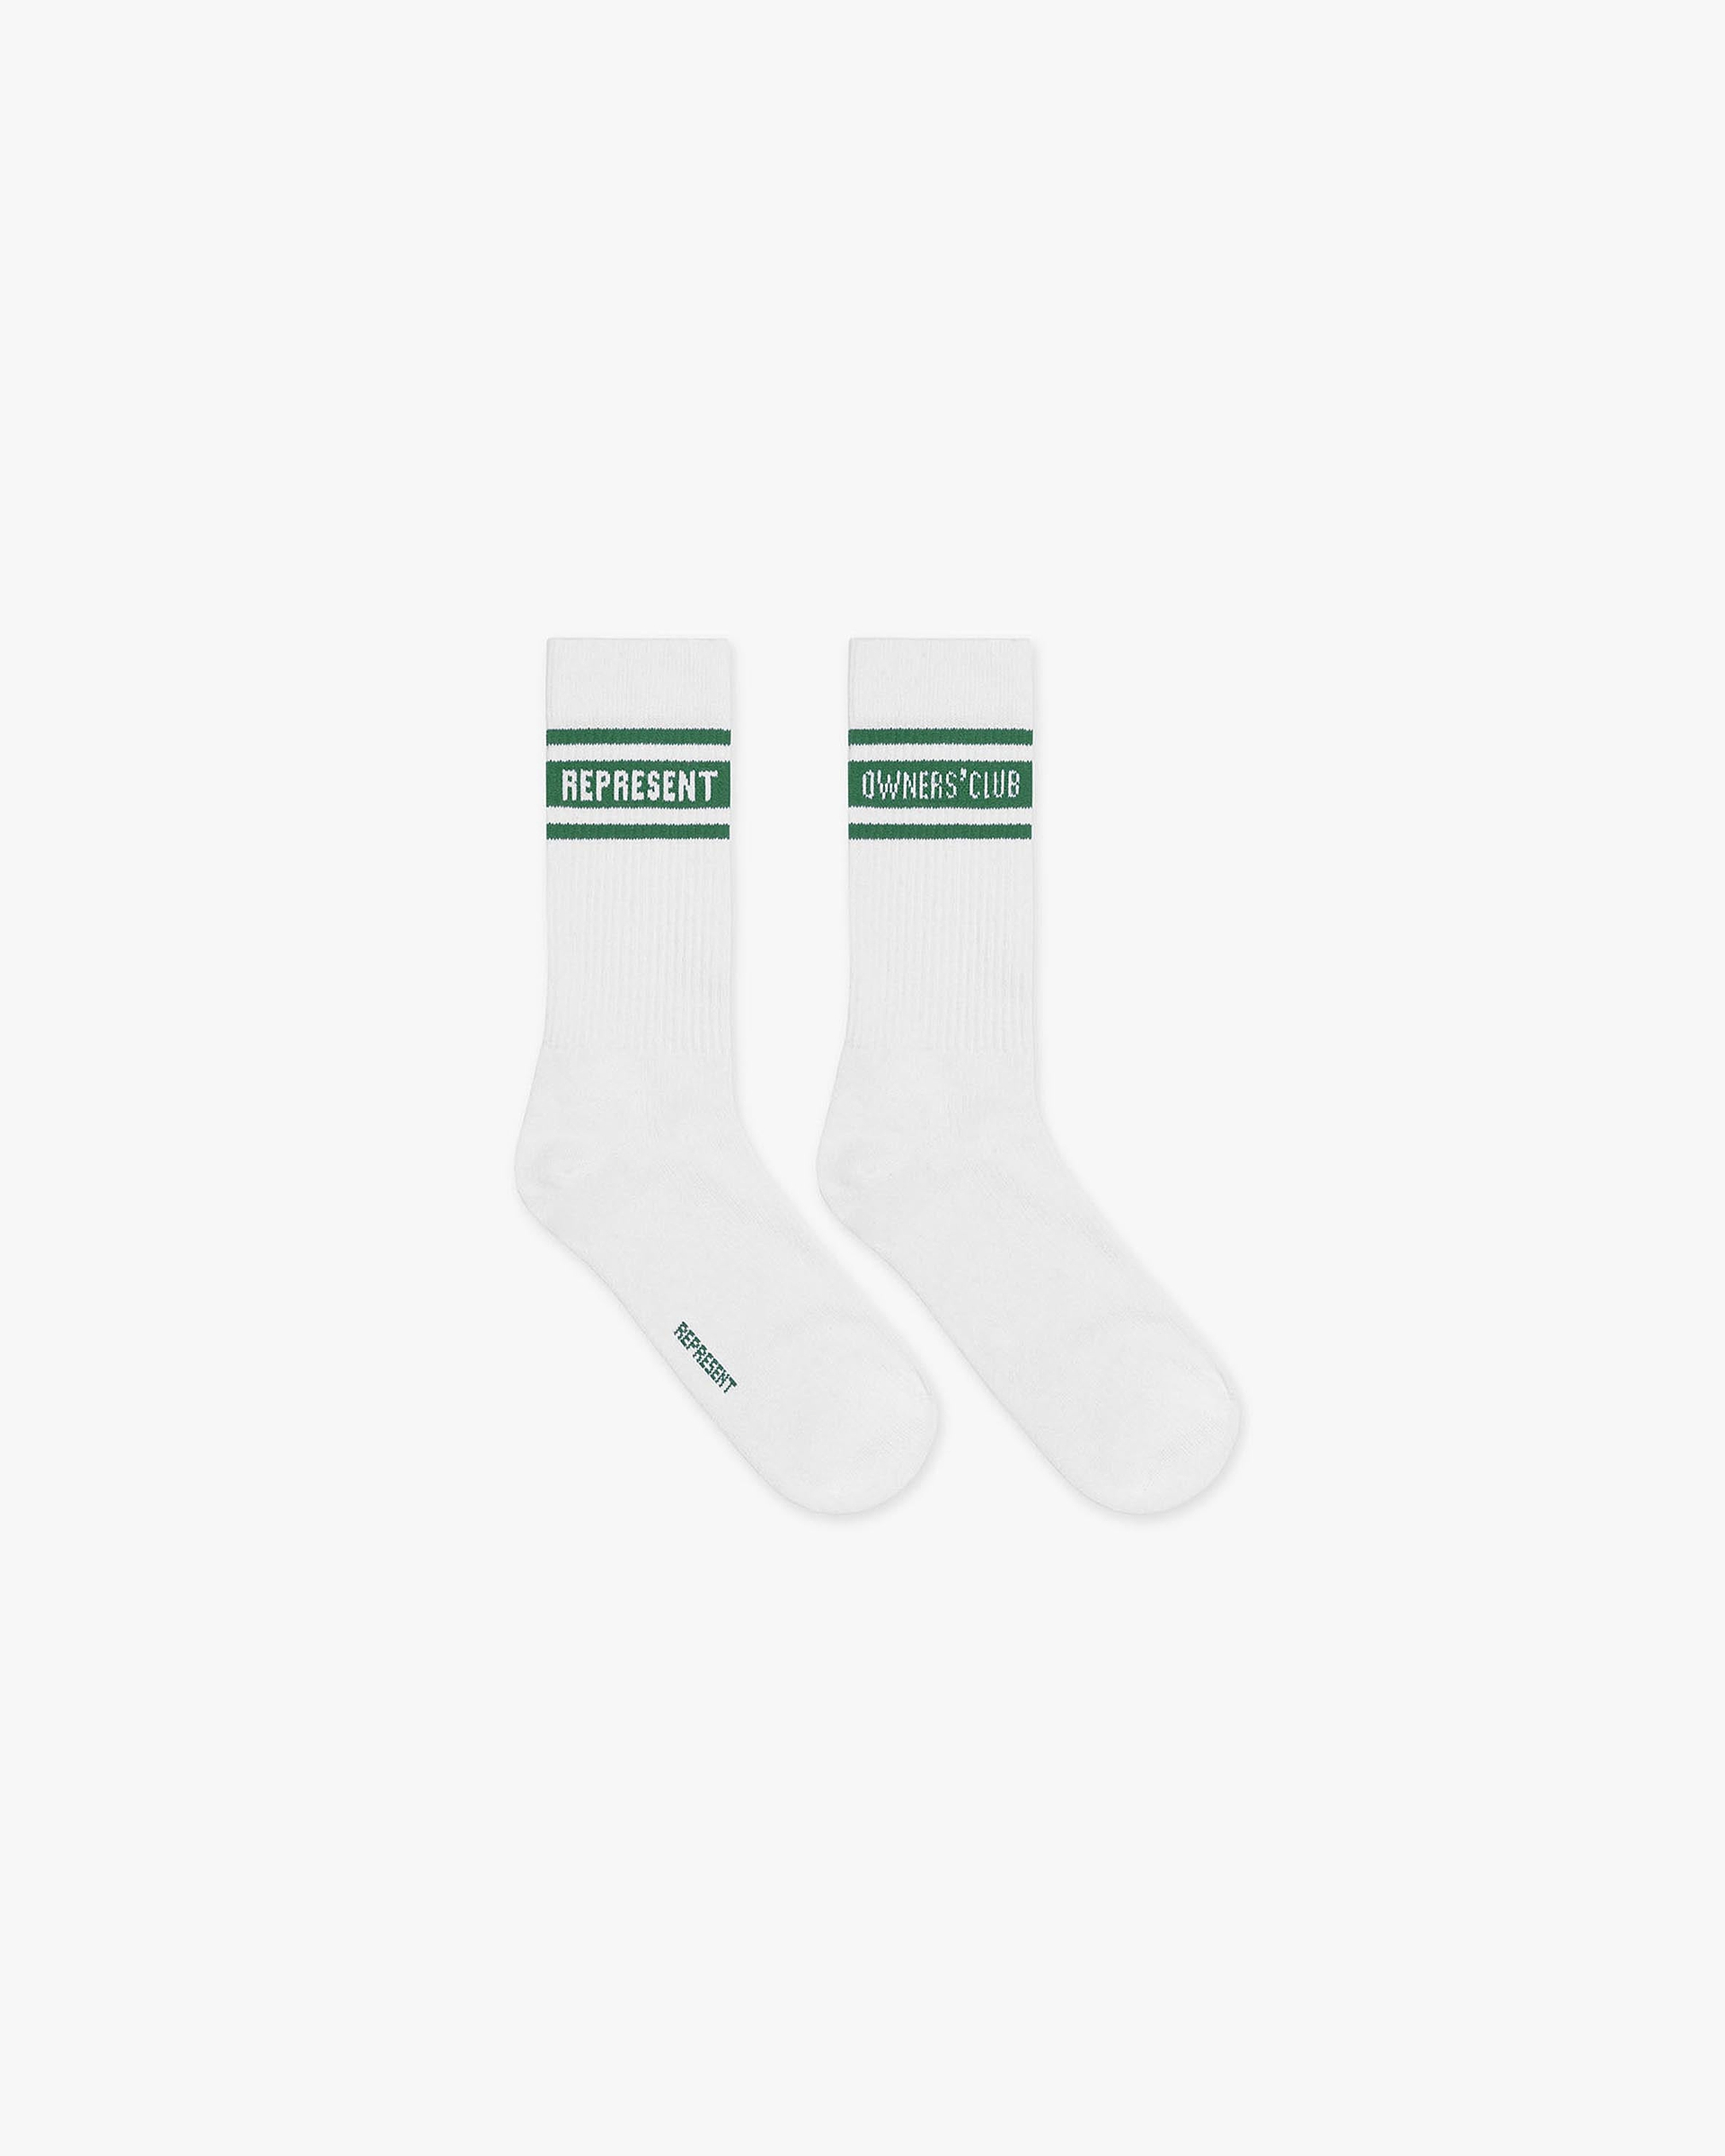 Represent Owners Club Socks | Flat White Racing Green Accessories Owners Club | Represent Clo